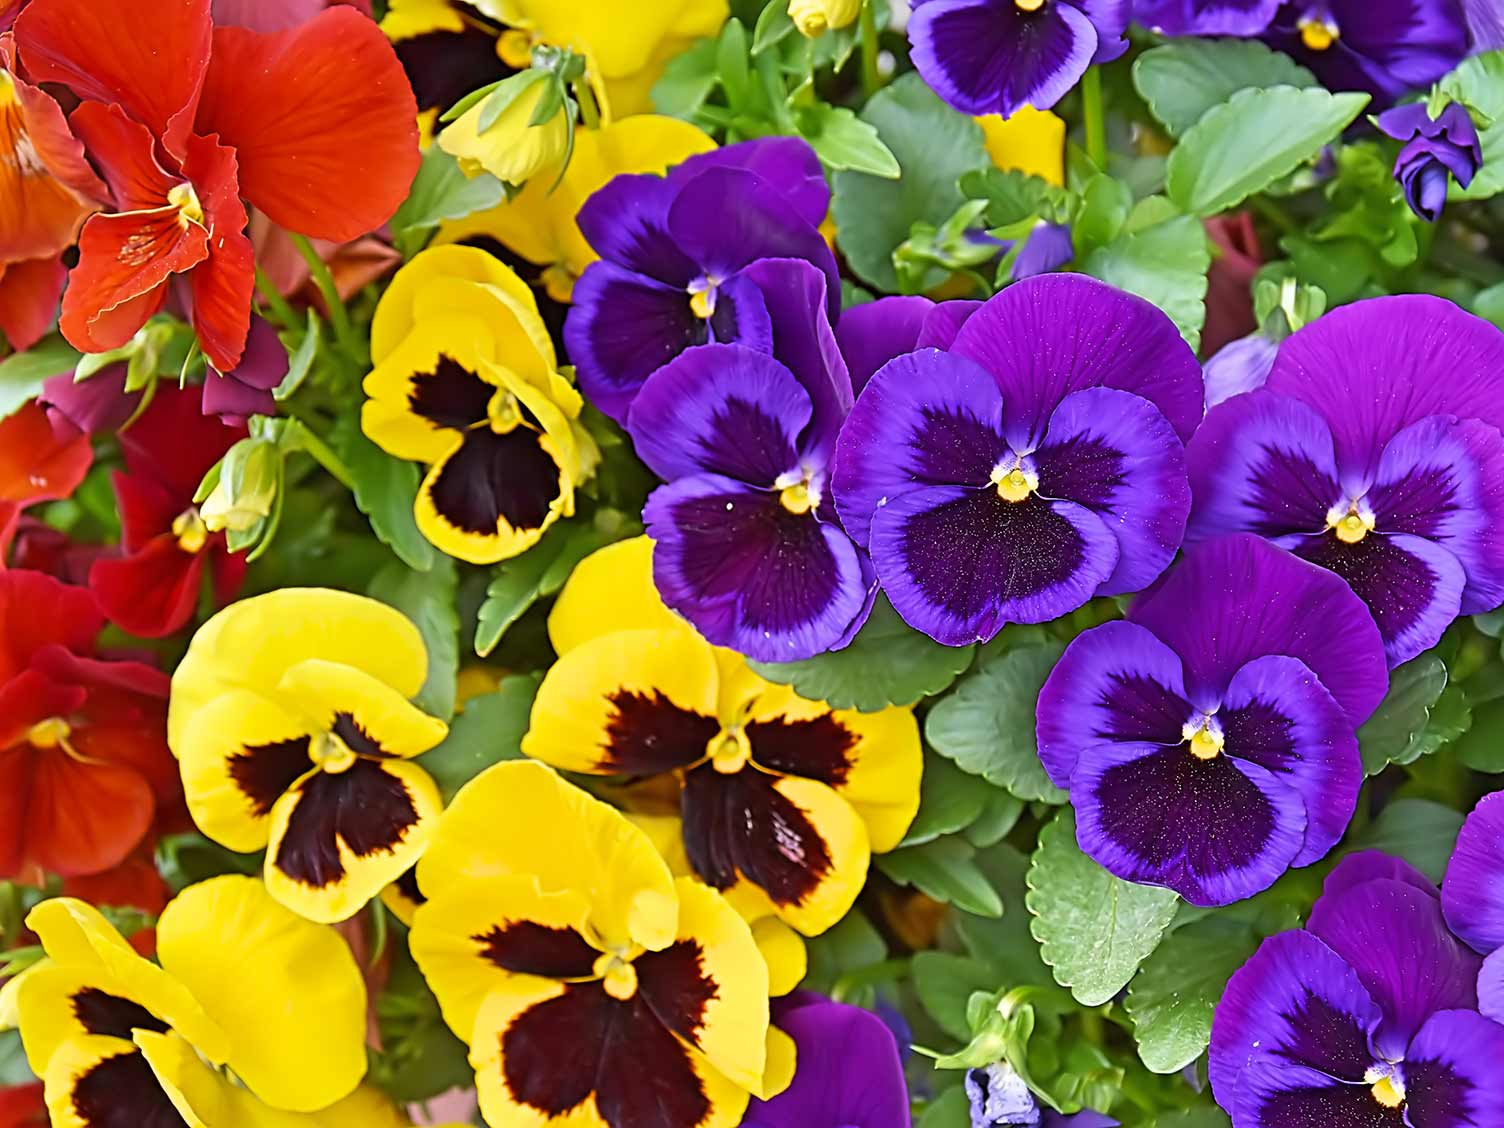 How to grow pansies and violets | lovethegarden